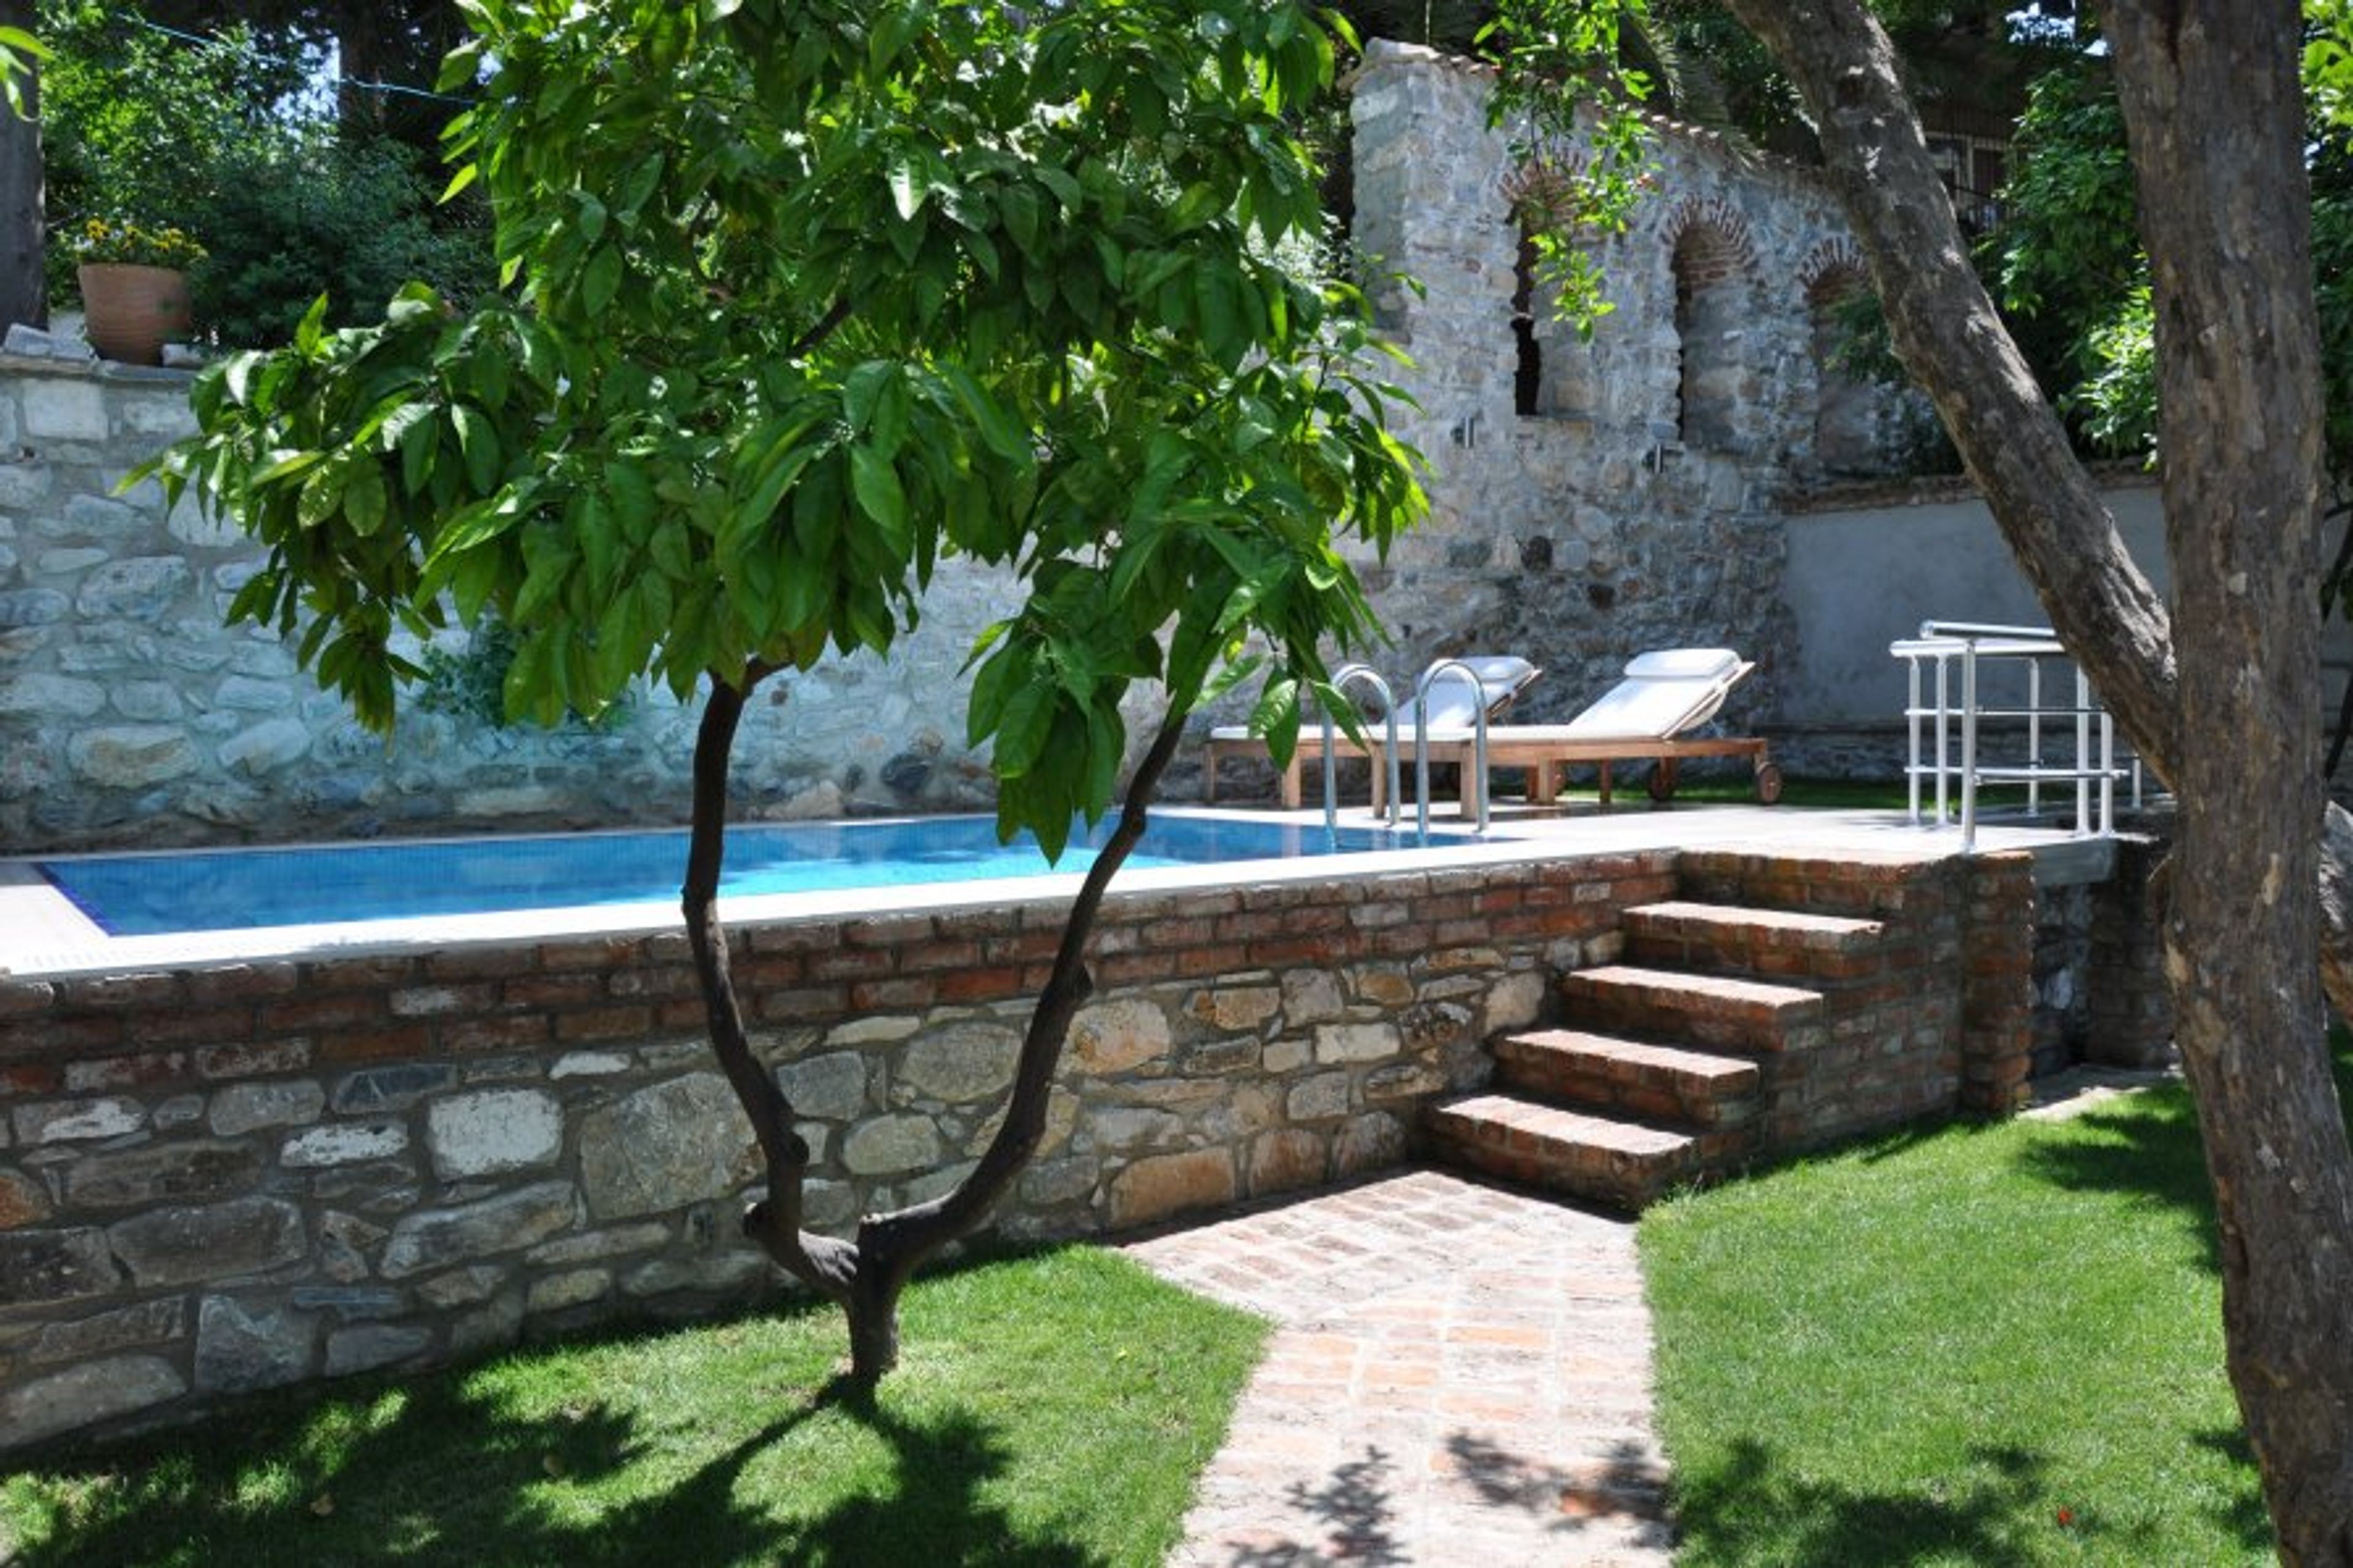 Swimming pool situated in a beautiful citrus garden.